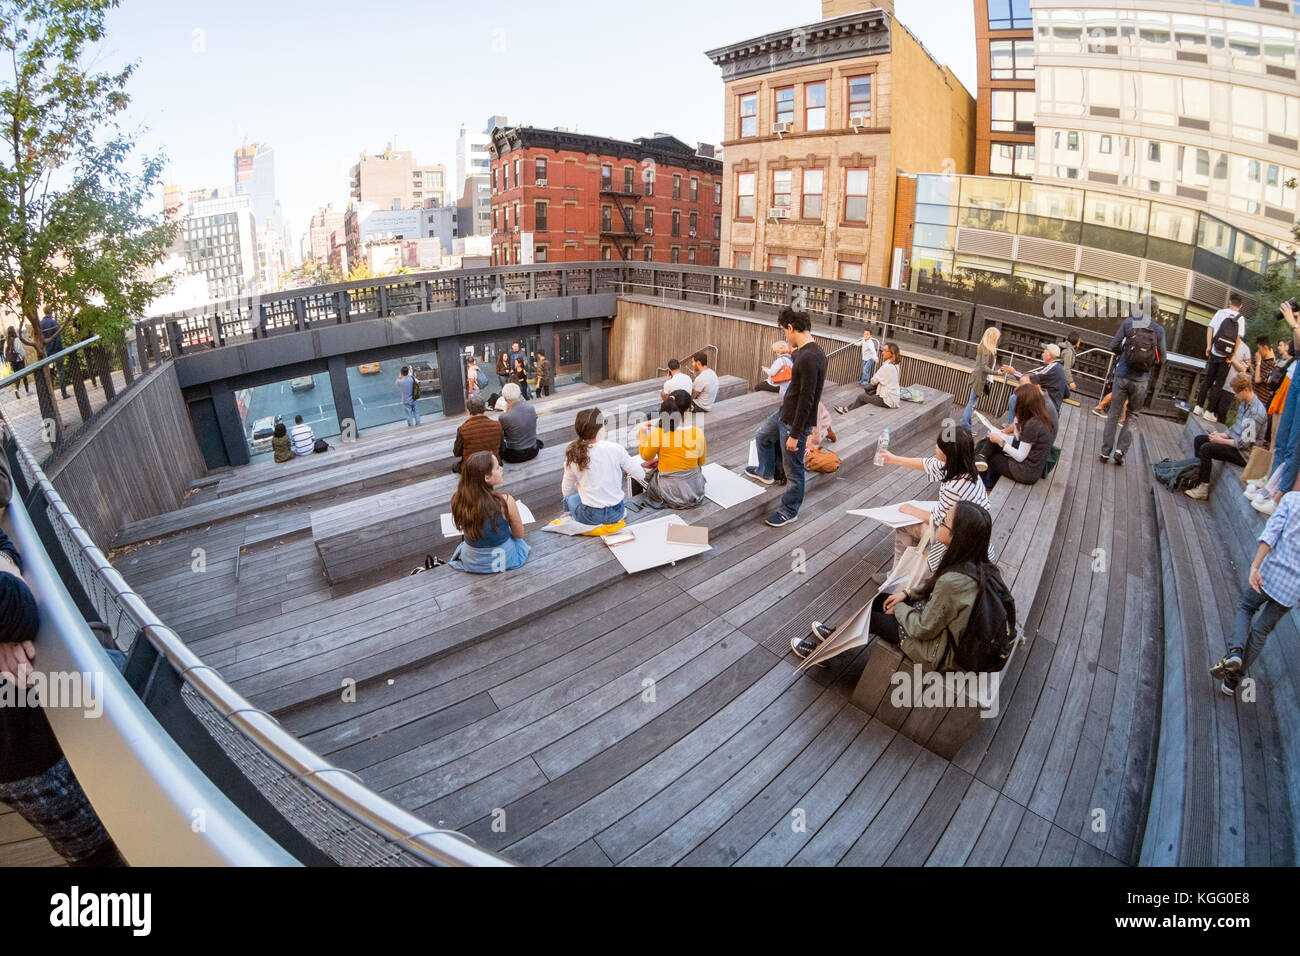 10th Avenue Square seated viewing area, High Line Elevated Park ...